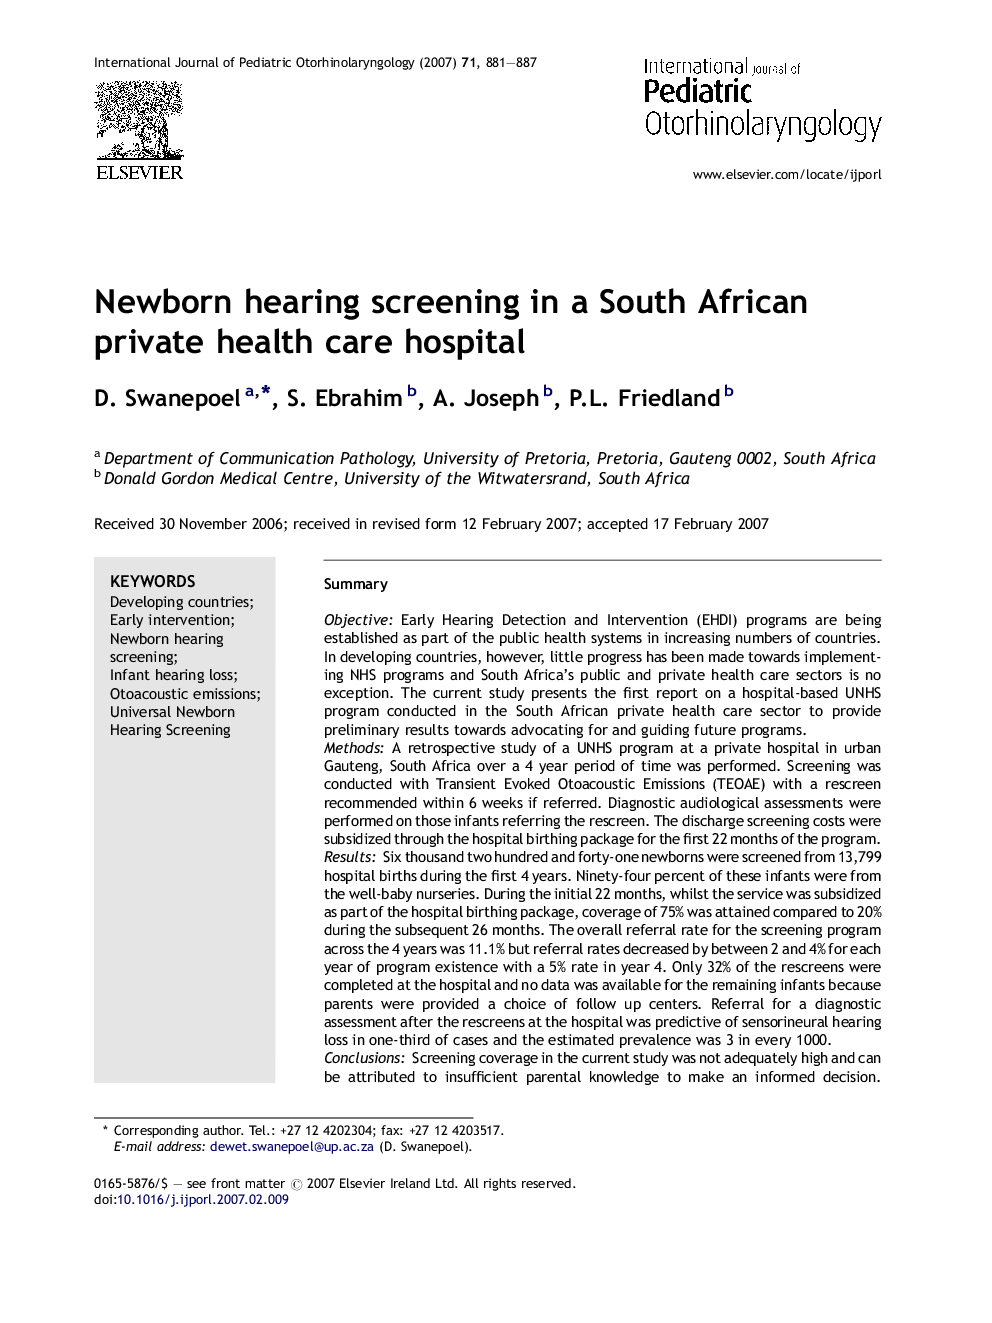 Newborn hearing screening in a South African private health care hospital